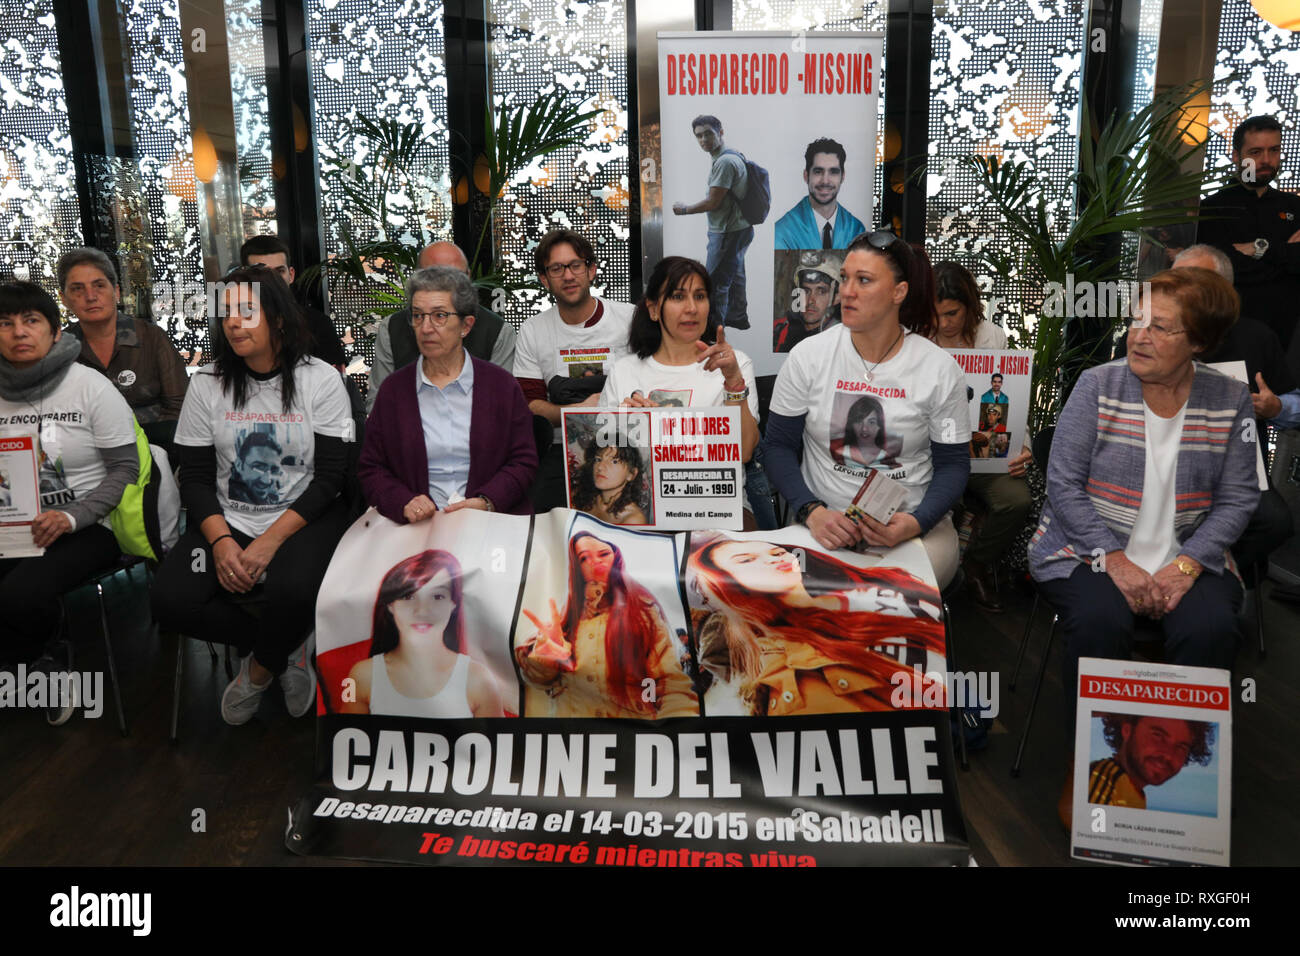 Relatives of the missing persons are seen holding placards and a banner during the occasion. The European Foundation for Missing Persons QSDGlobal organized an Informative breakfast for Paco Molina who has been missing since 2015. Stock Photo